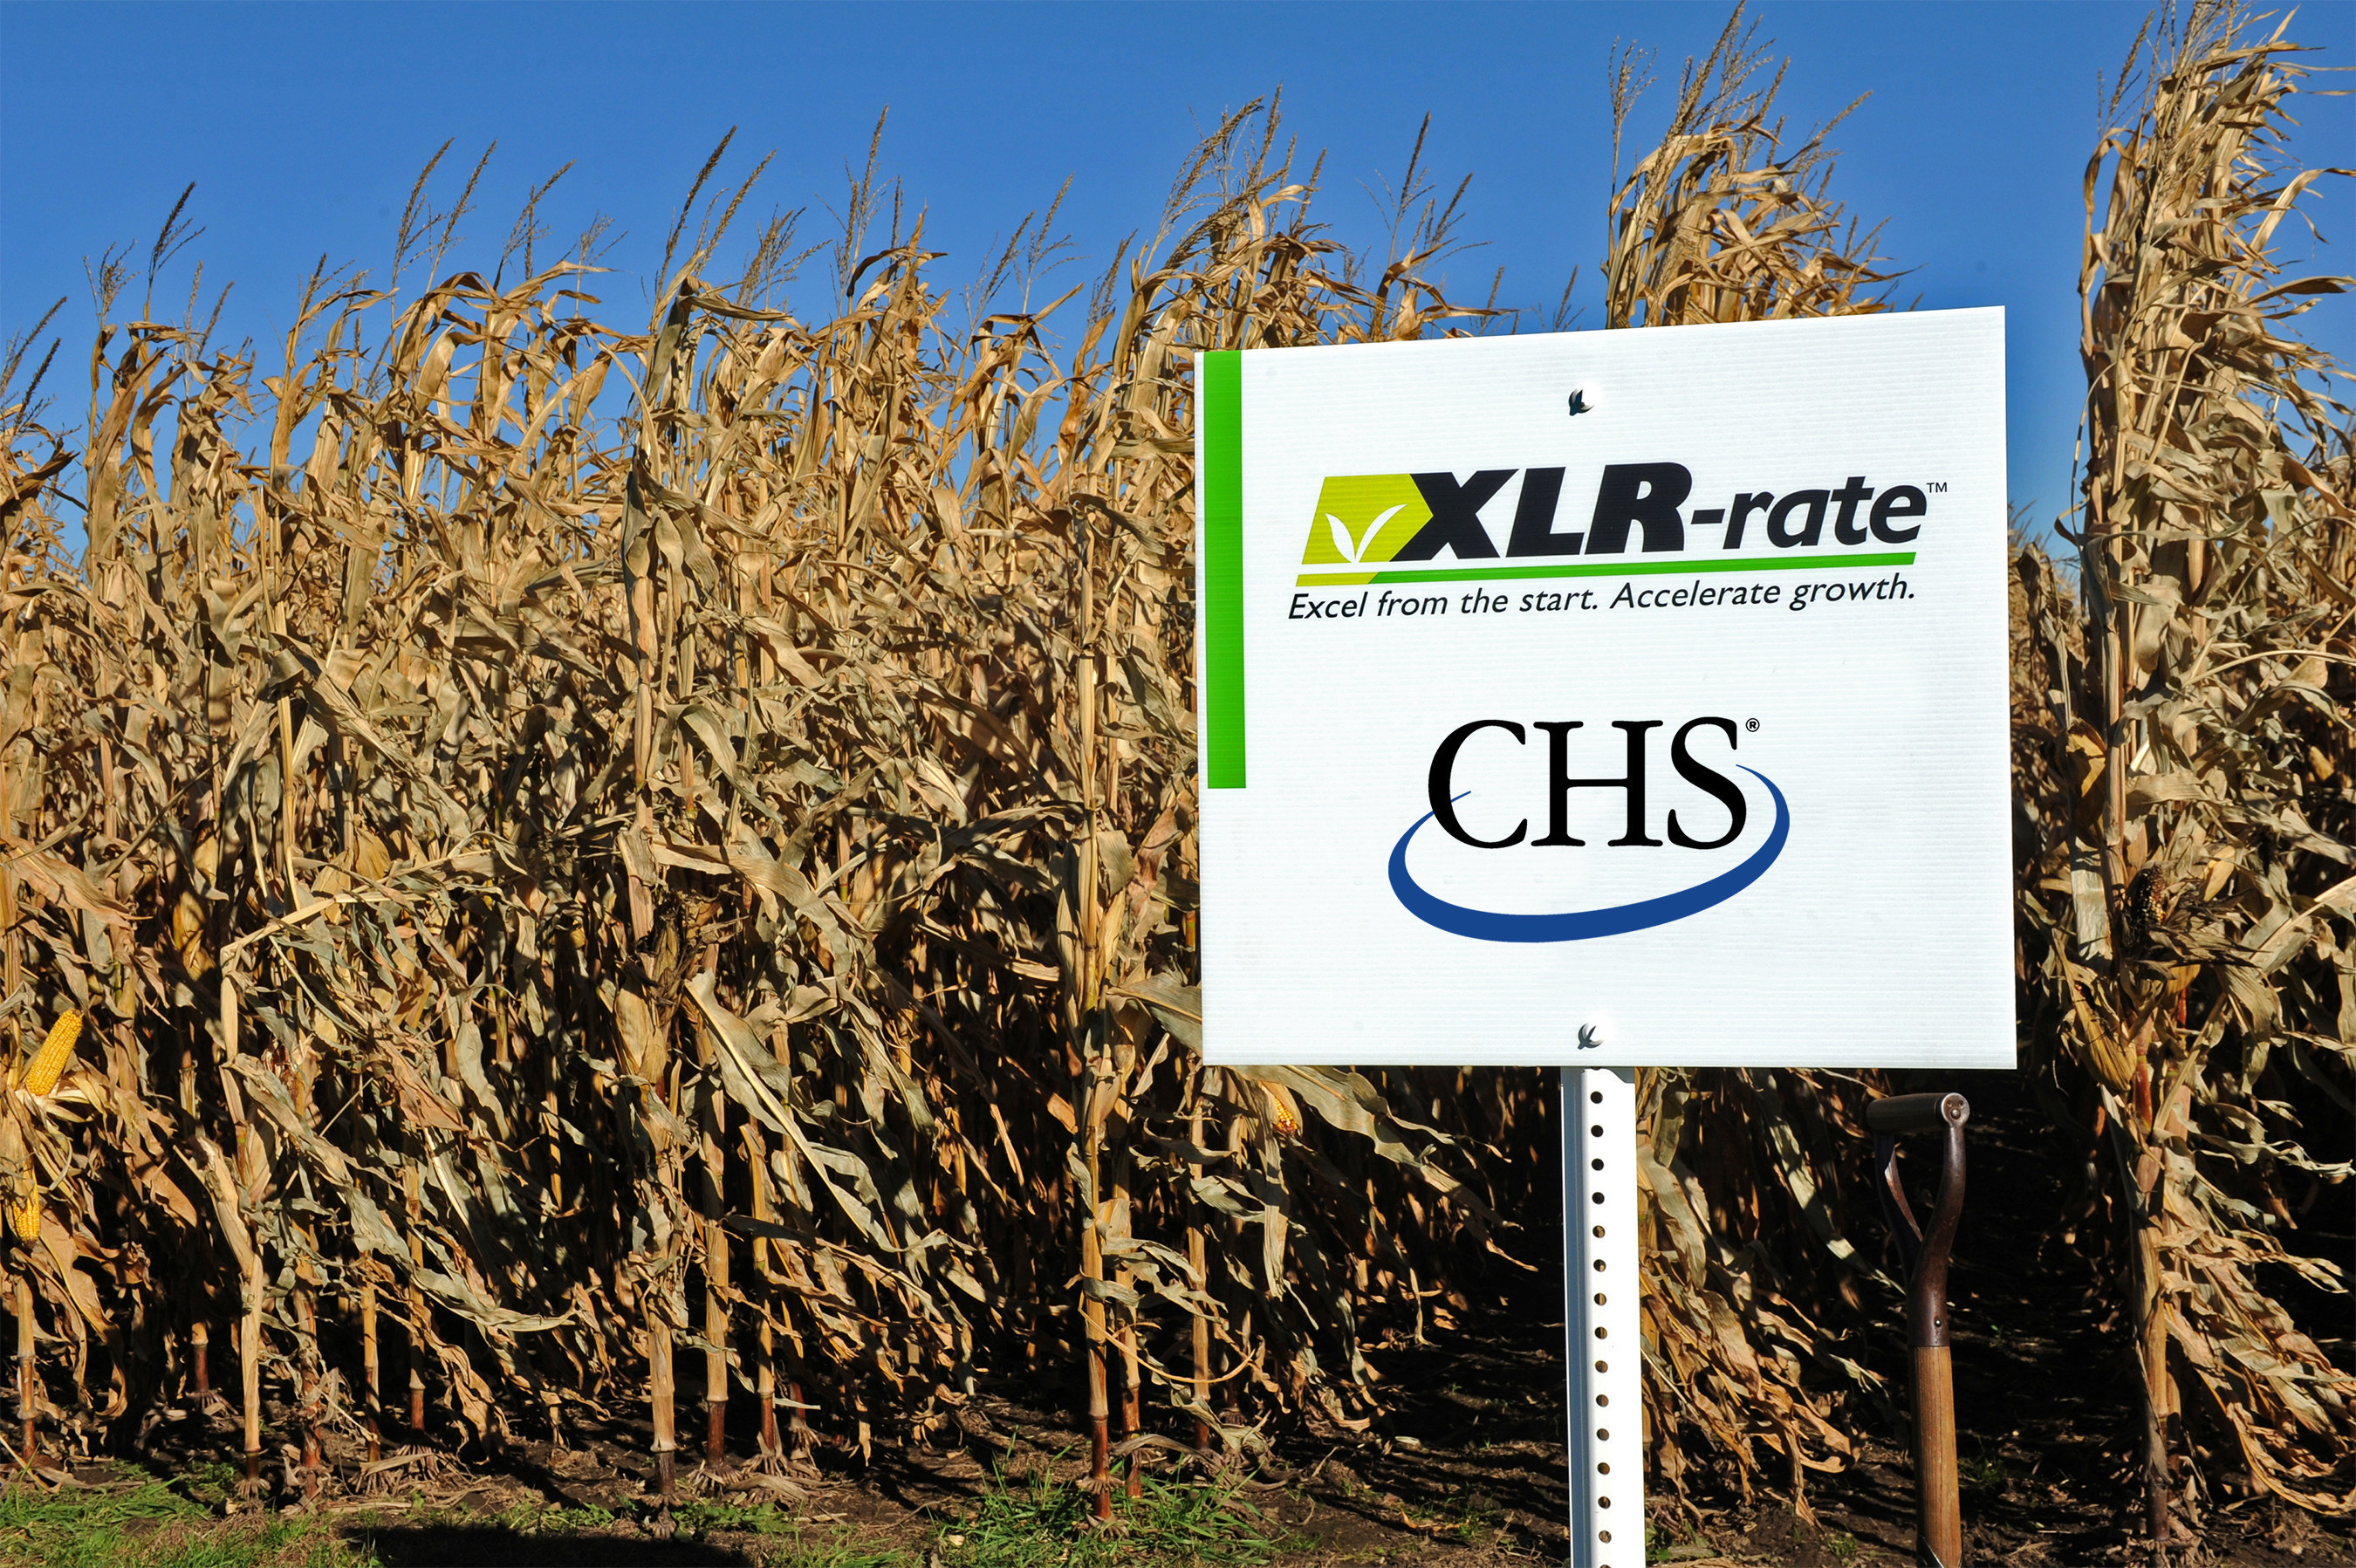 Midwestern test plot trials of CHS XLR-rate(R) starter fertilizer resulted in yield increases of 8- to 14- bushels per acre versus no starter. Starter fertilizer provides the biggest benefits when growers are planting in cold, wet springs, during early or late planting, when soil phosphorus levels are low, and when plants suffer from significant stress such as heat or drought stress.